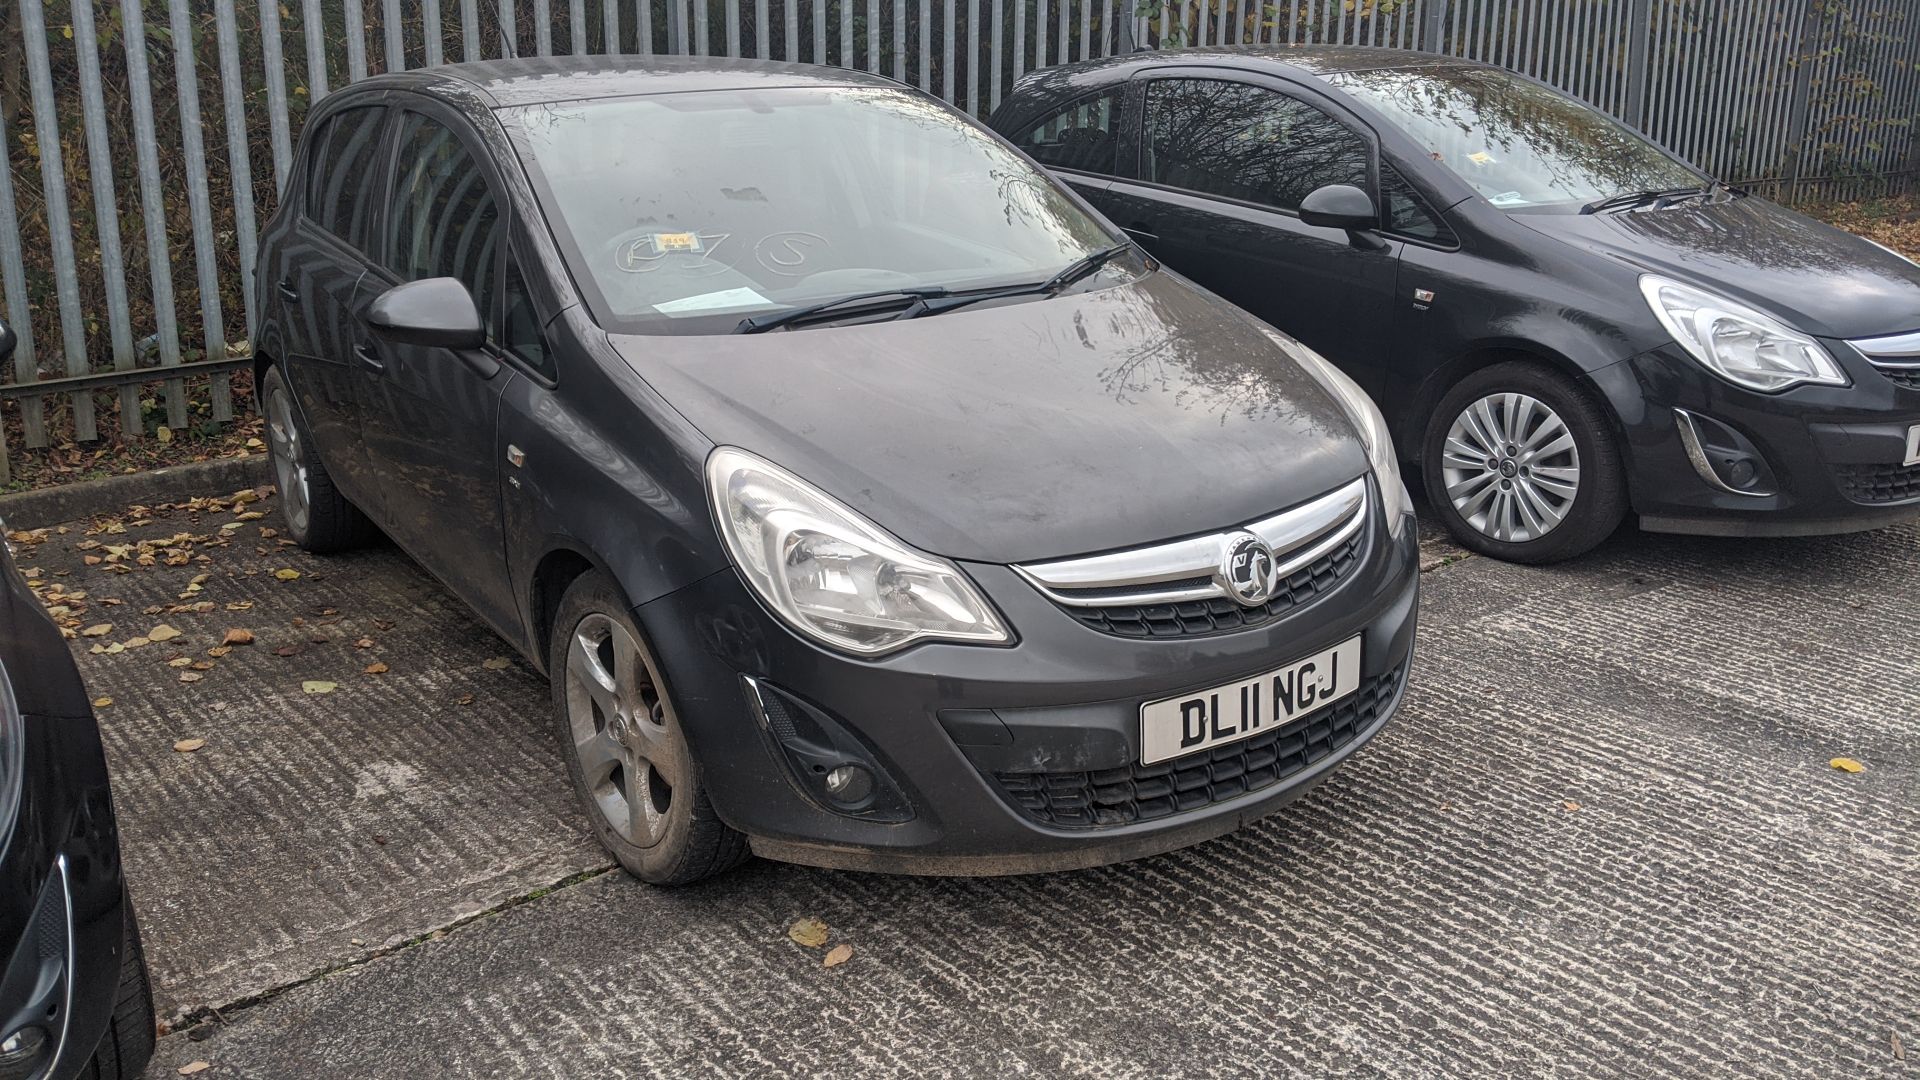 DL11 NGJ Vauxhall Corsa SXI 5 door hatchback, 5 speed manual gearbox, 1229cc petrol engine. - Image 2 of 23